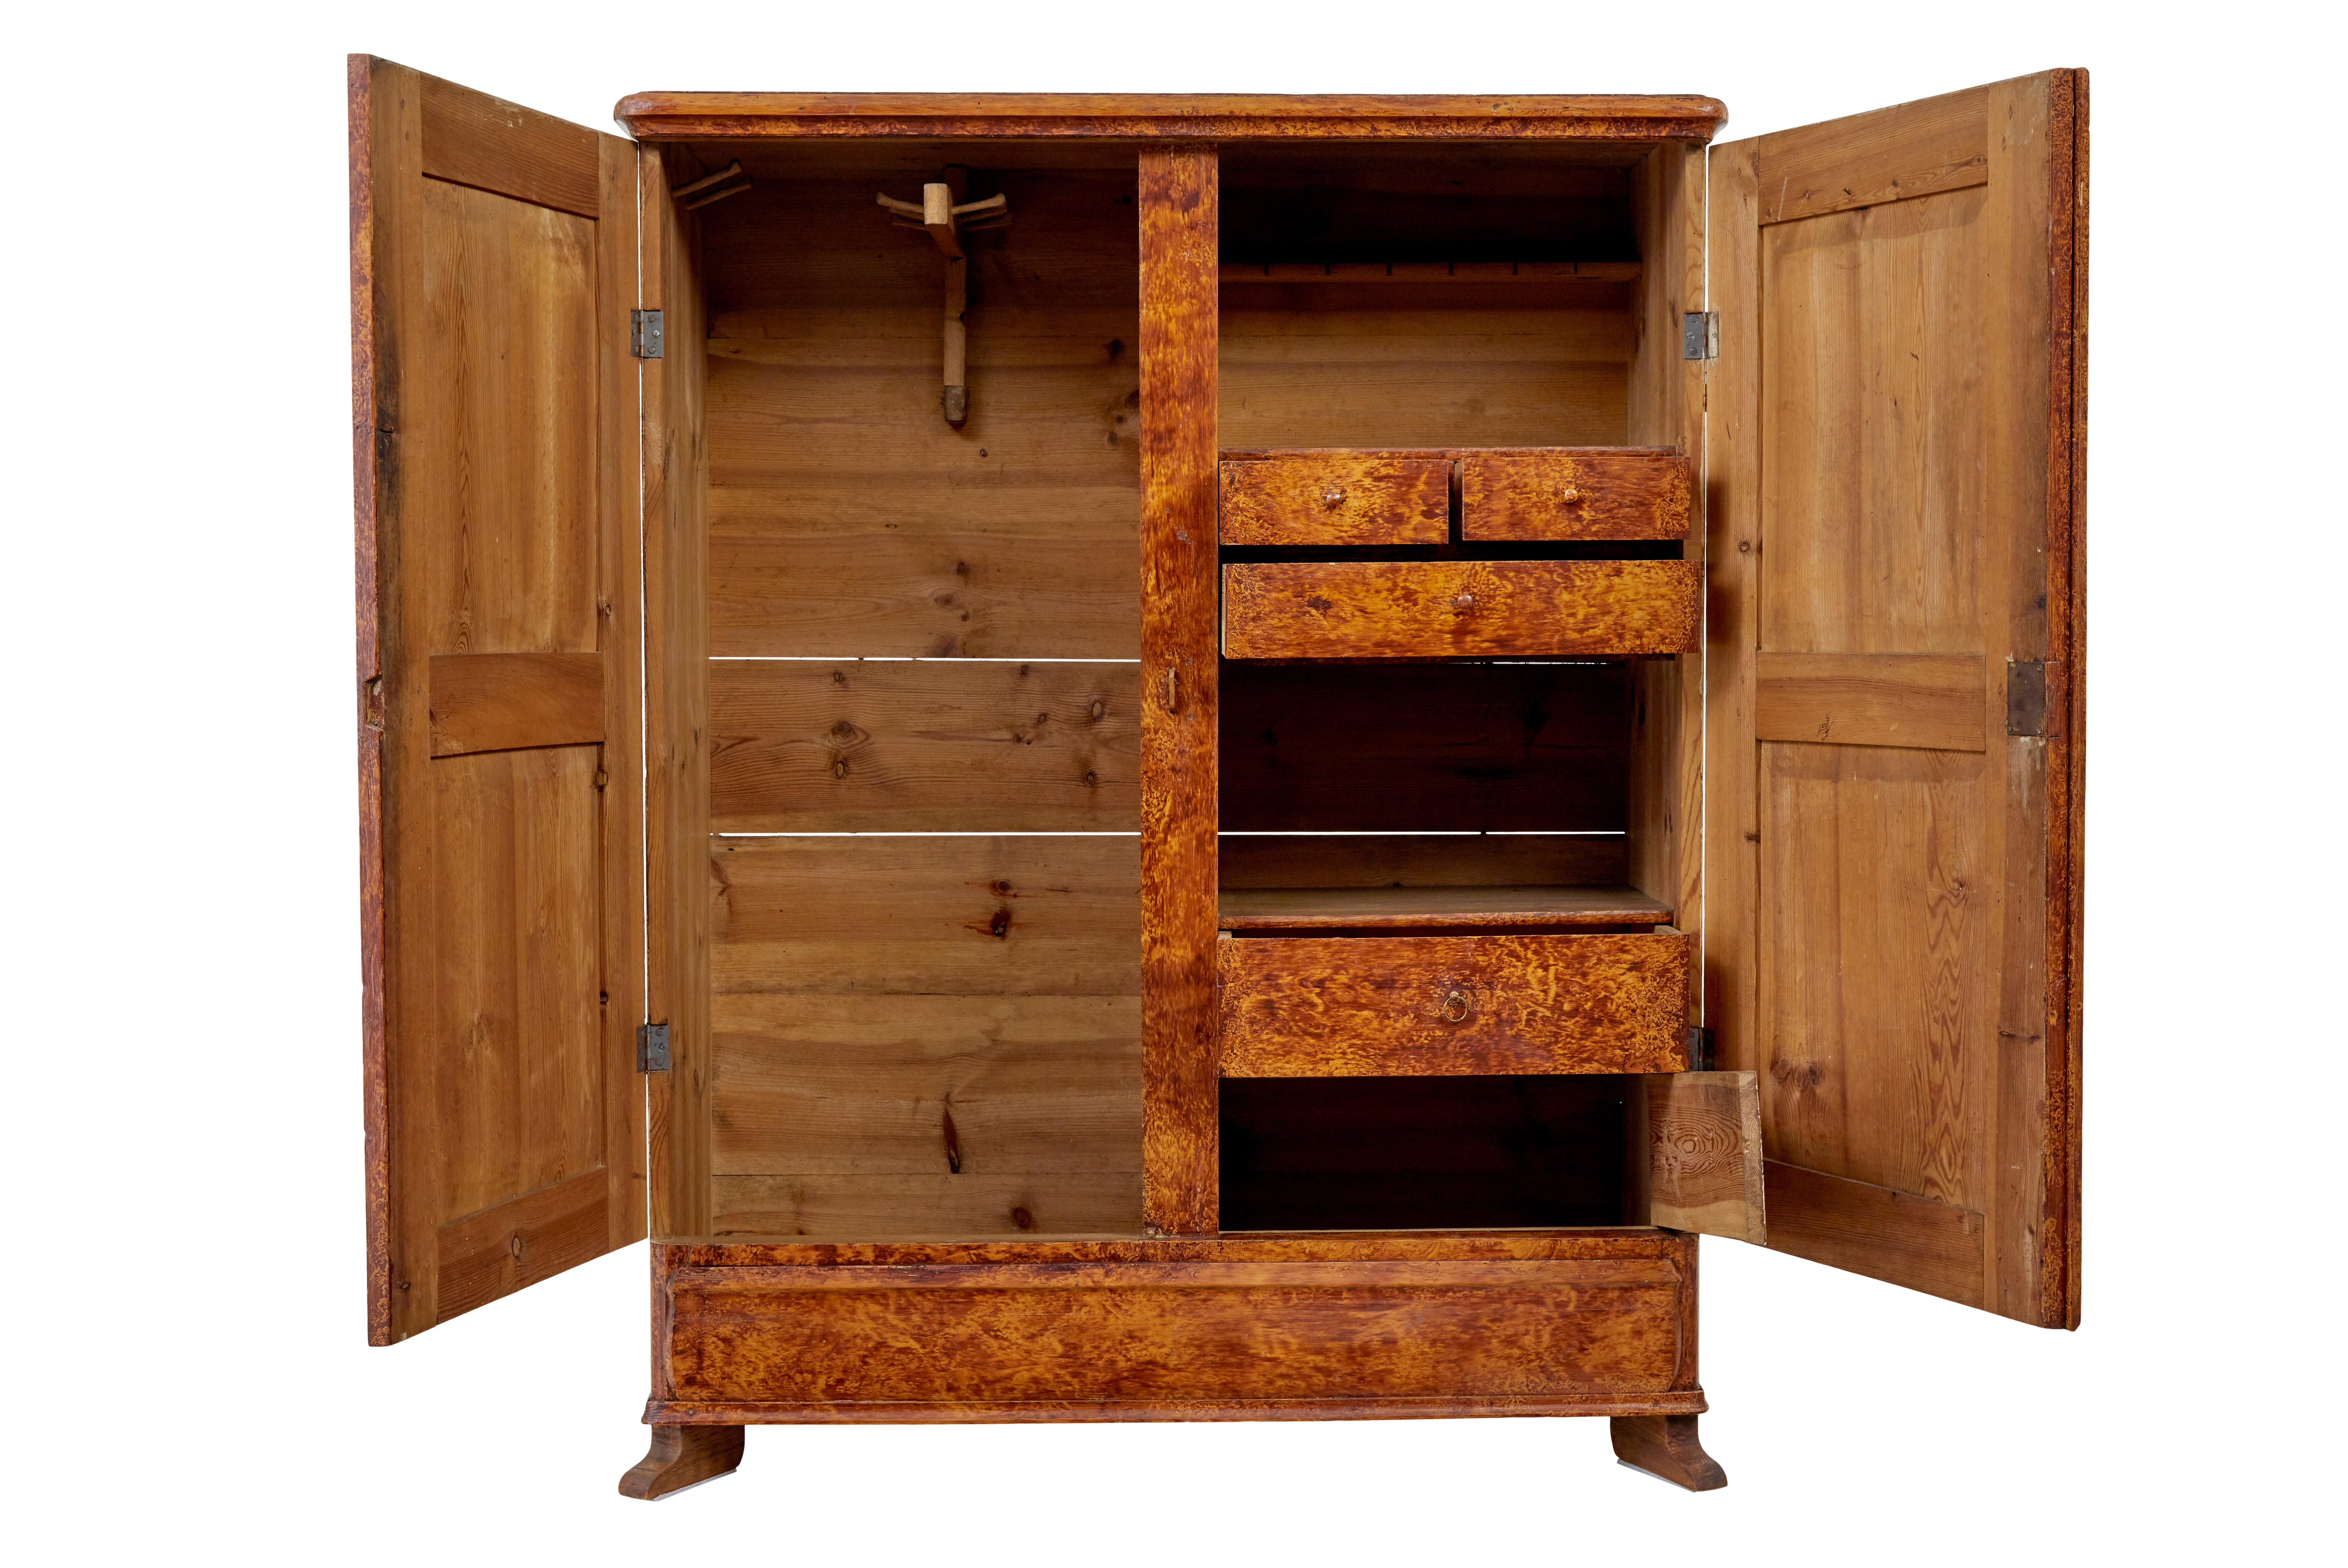 Hand-Crafted 19th century traditional Swedish ragwork pine cupboard For Sale